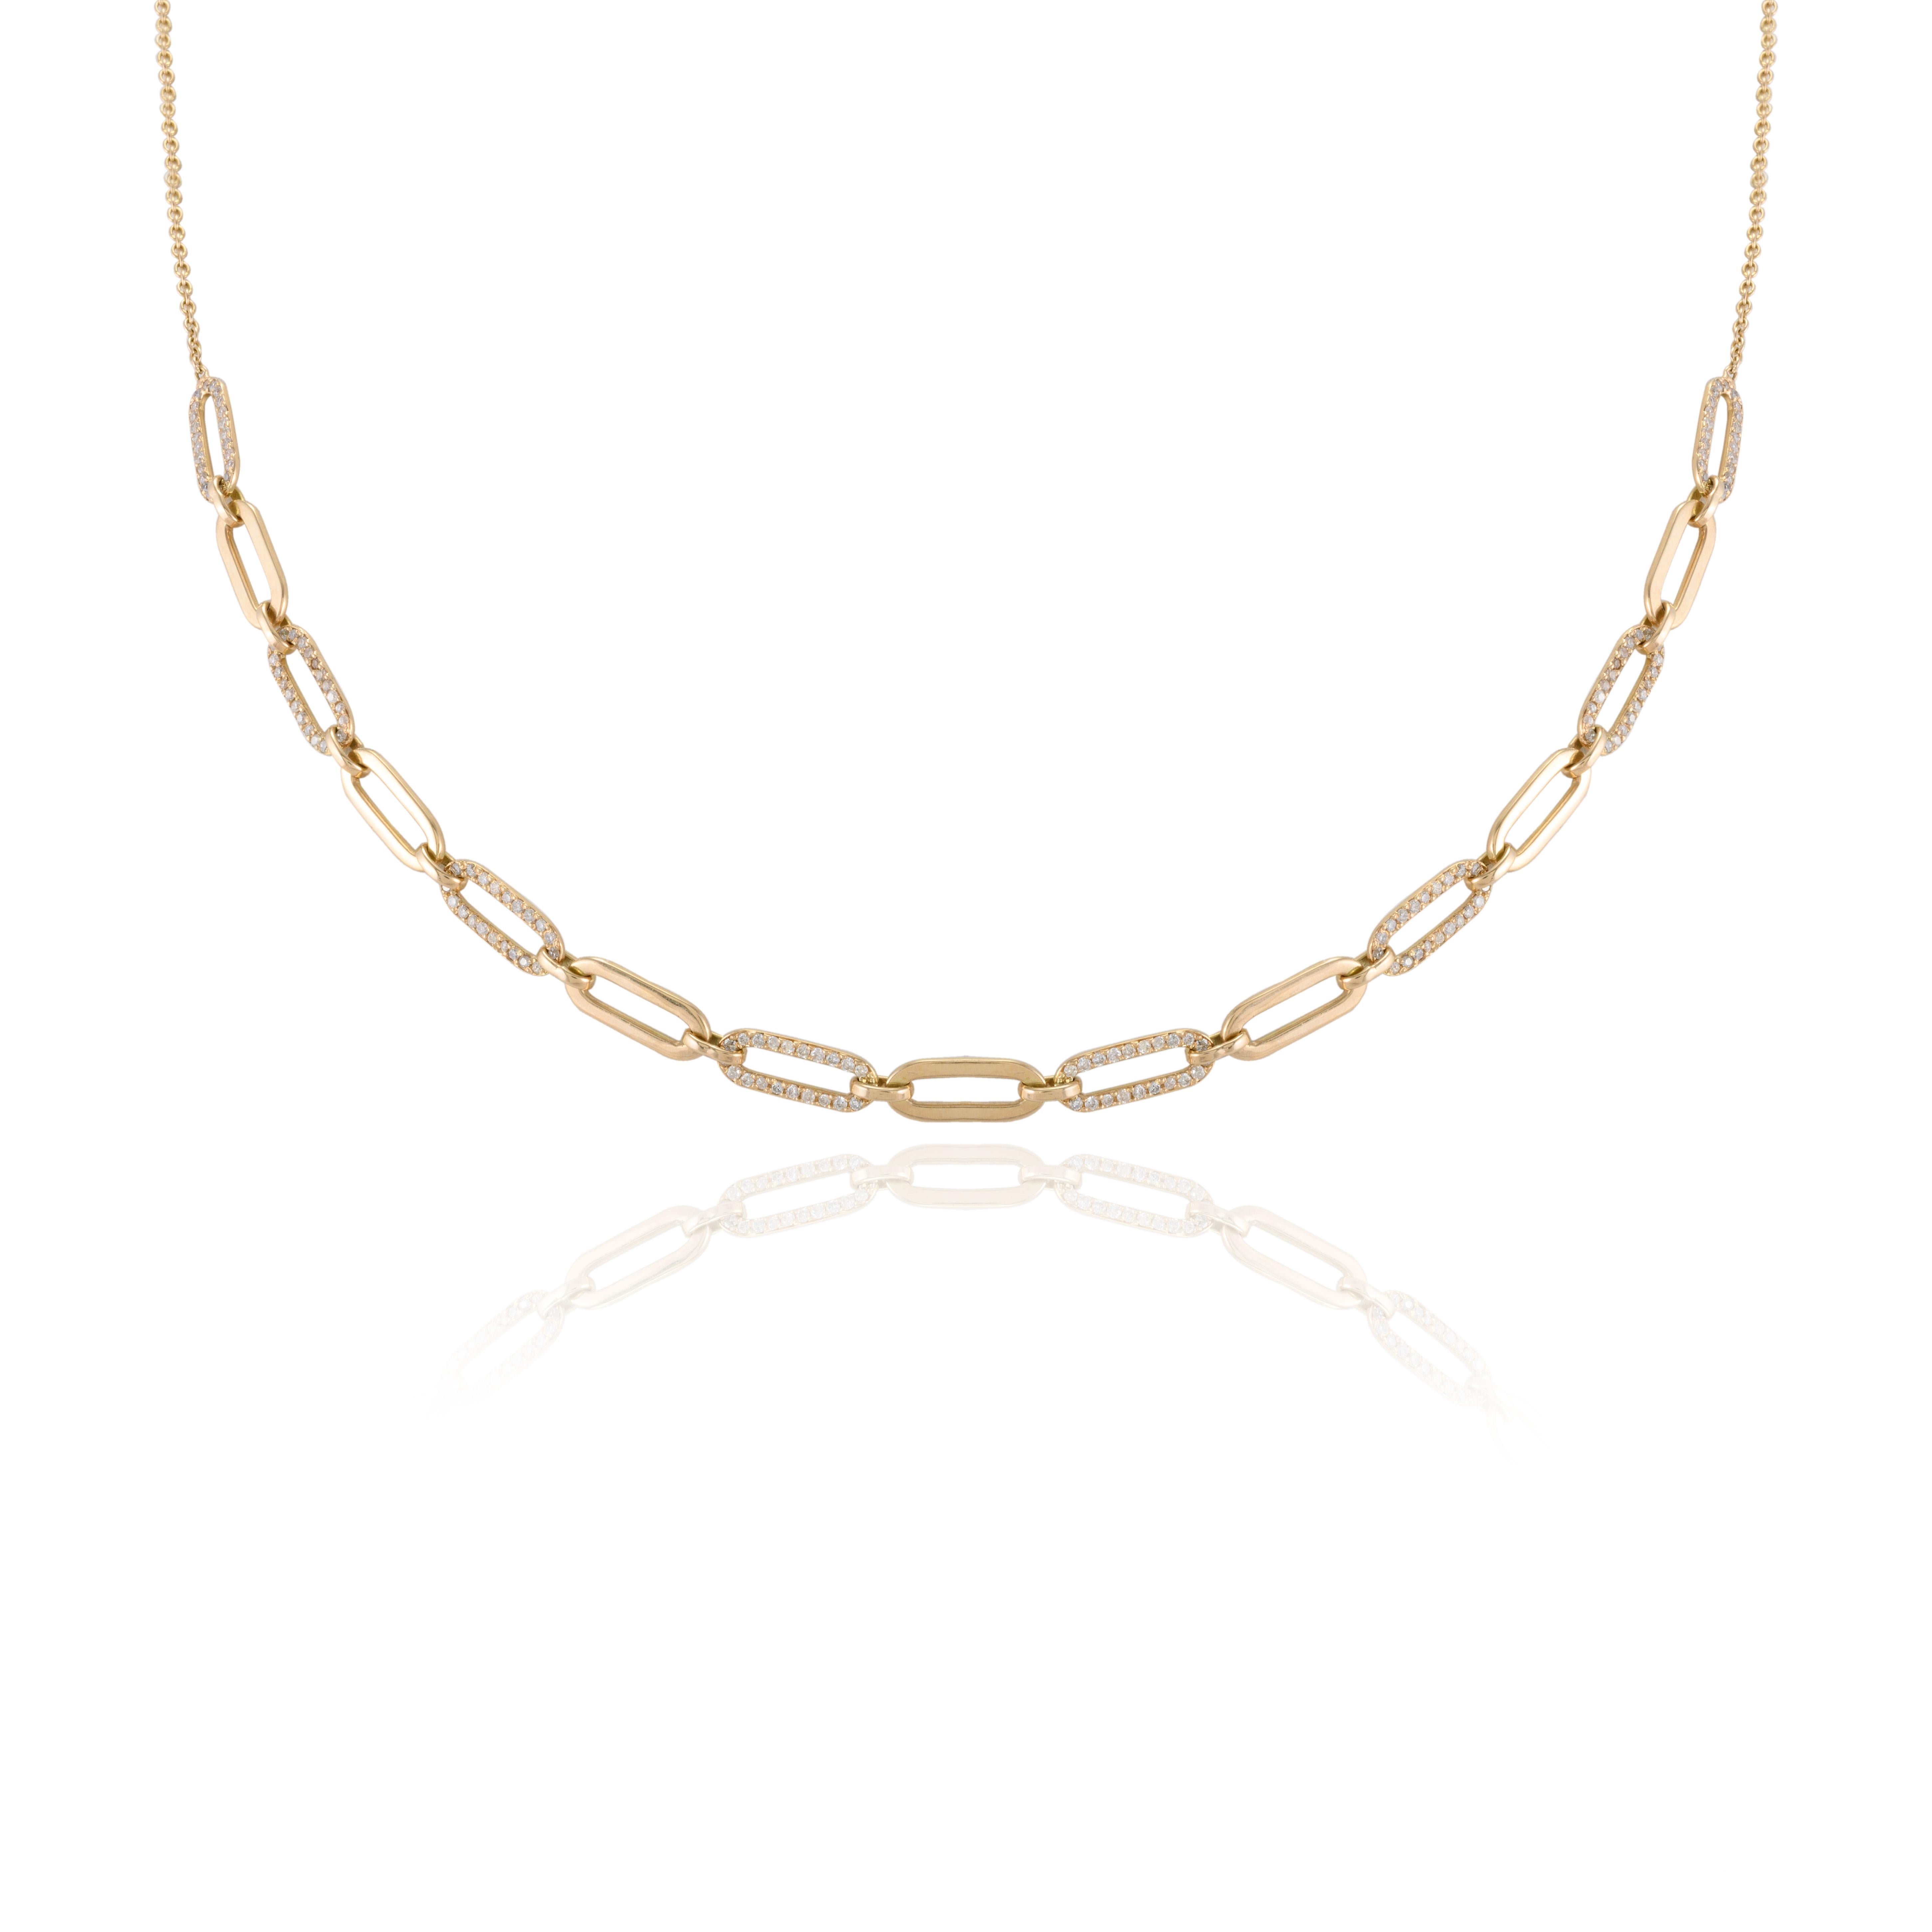 Modern Diamond Paperclip Chain Necklace in 14K gold studded with round cut diamond. This stunning piece of jewelry instantly elevates a casual look or dressy outfit. 
April birthstone diamond brings love, fame, success and prosperity.
Designed with